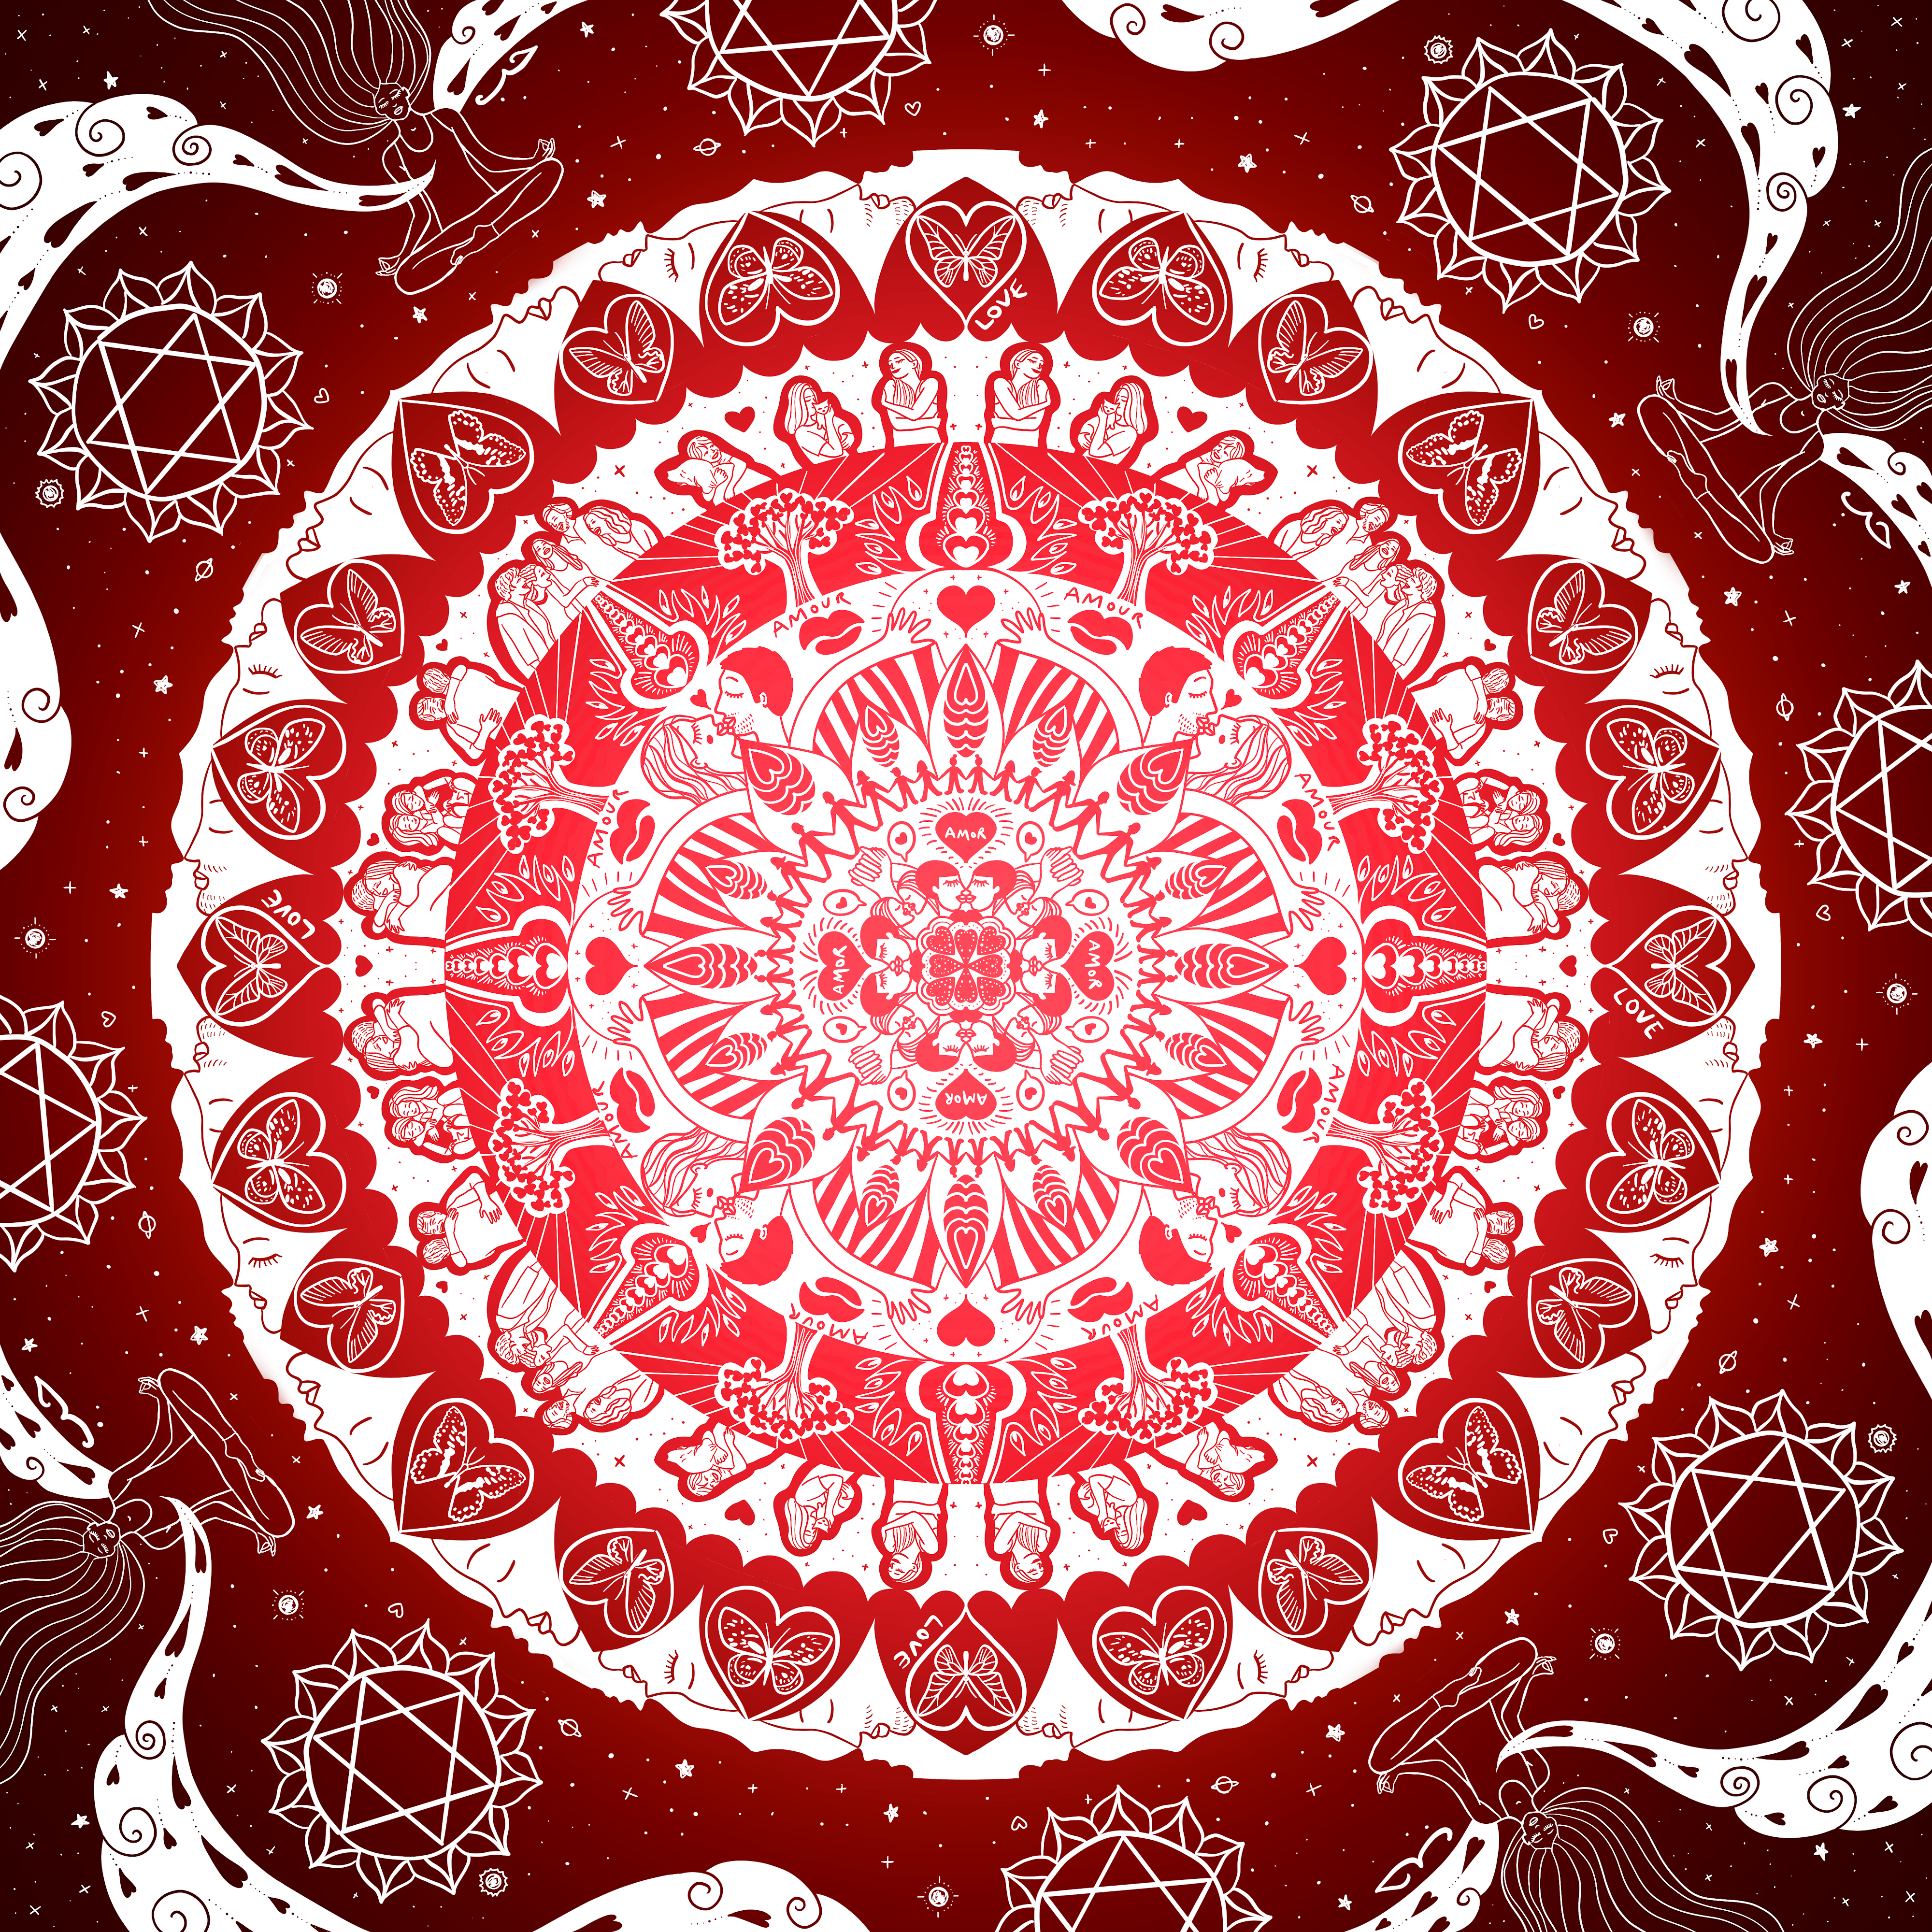 Mandala love in all its forms